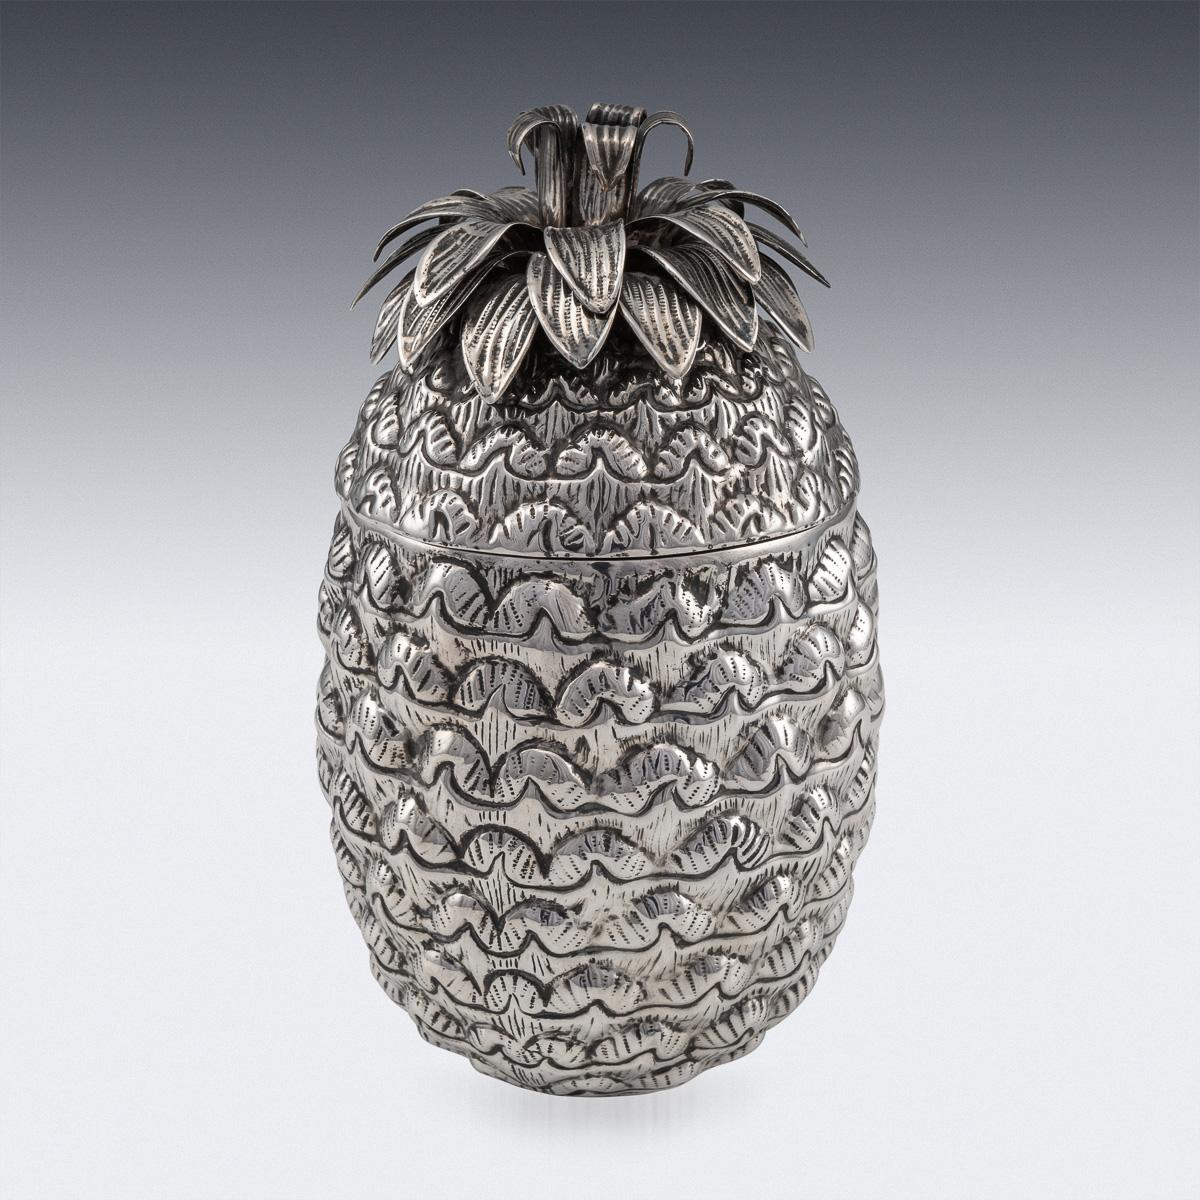 Novelty 20th century Italian solid silver ice bucket, in a form of a pineapple, removable lid mounted with realistically modelled leaves and richly gilt interior. Hallmarked Italian silver, Alessandria (AL), year 1968-present.

Condition

In